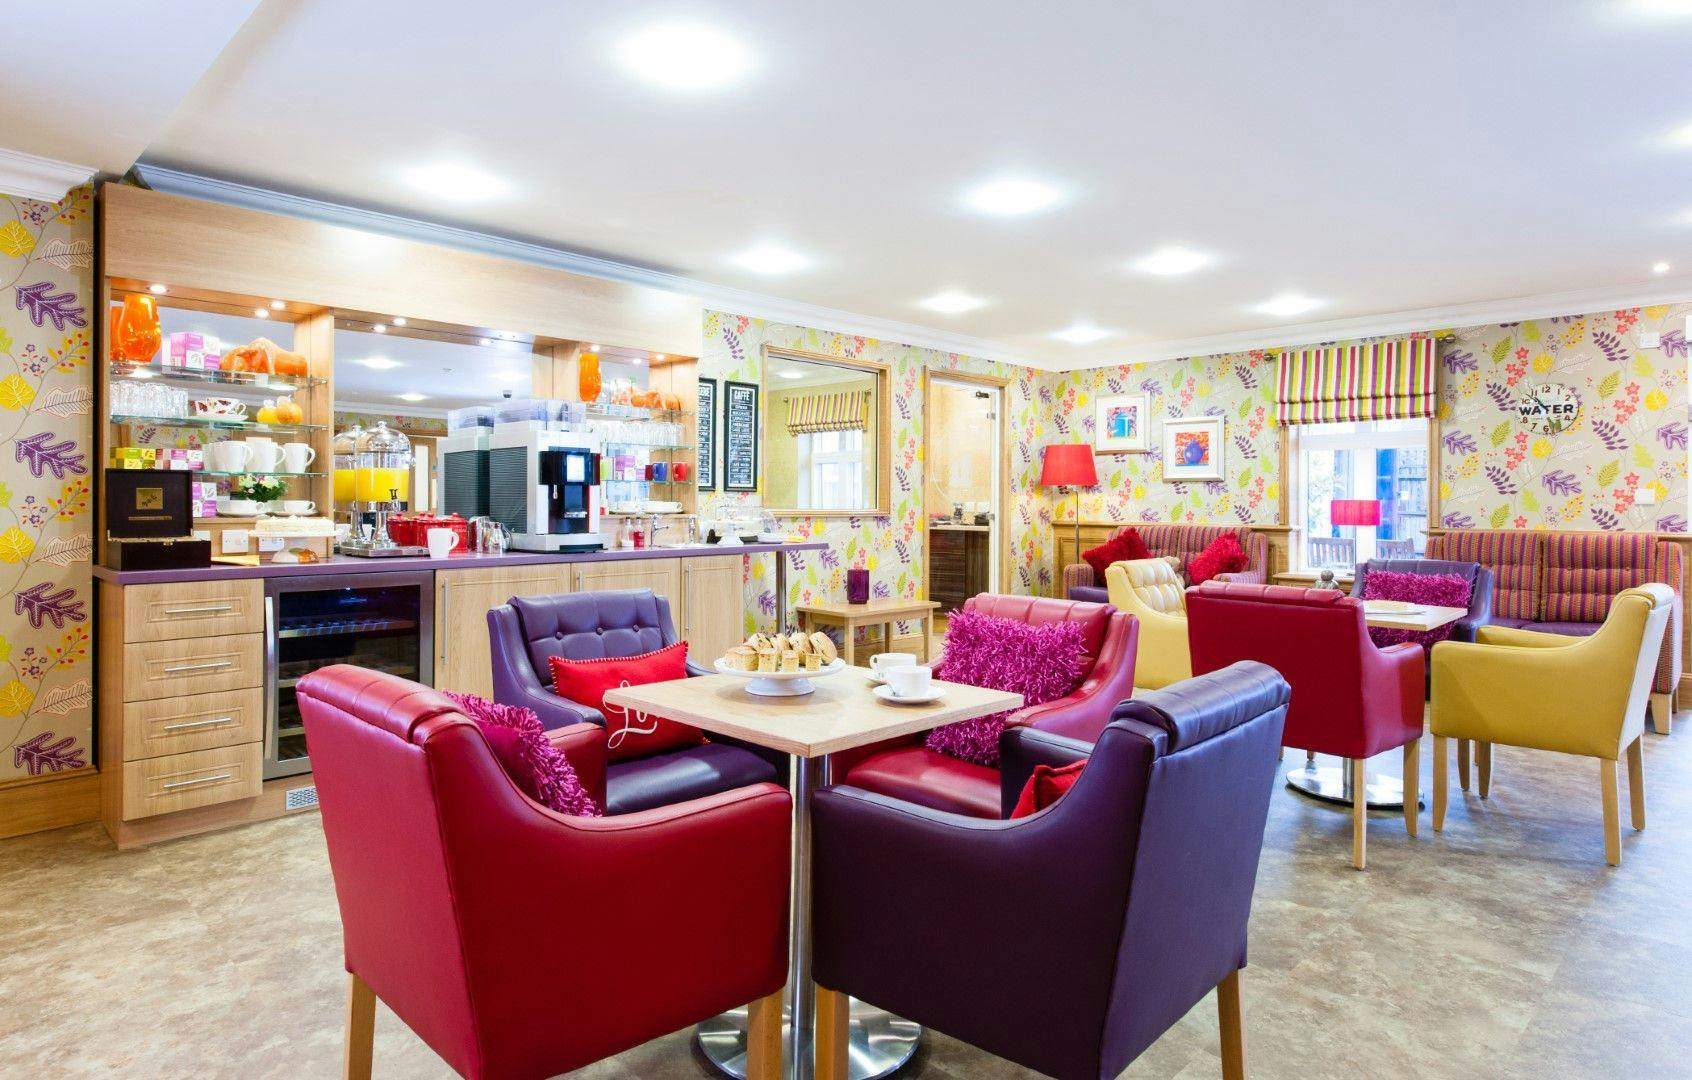 Dining Area at Kew House Care Home in Kingston upon Thames, Greater London 